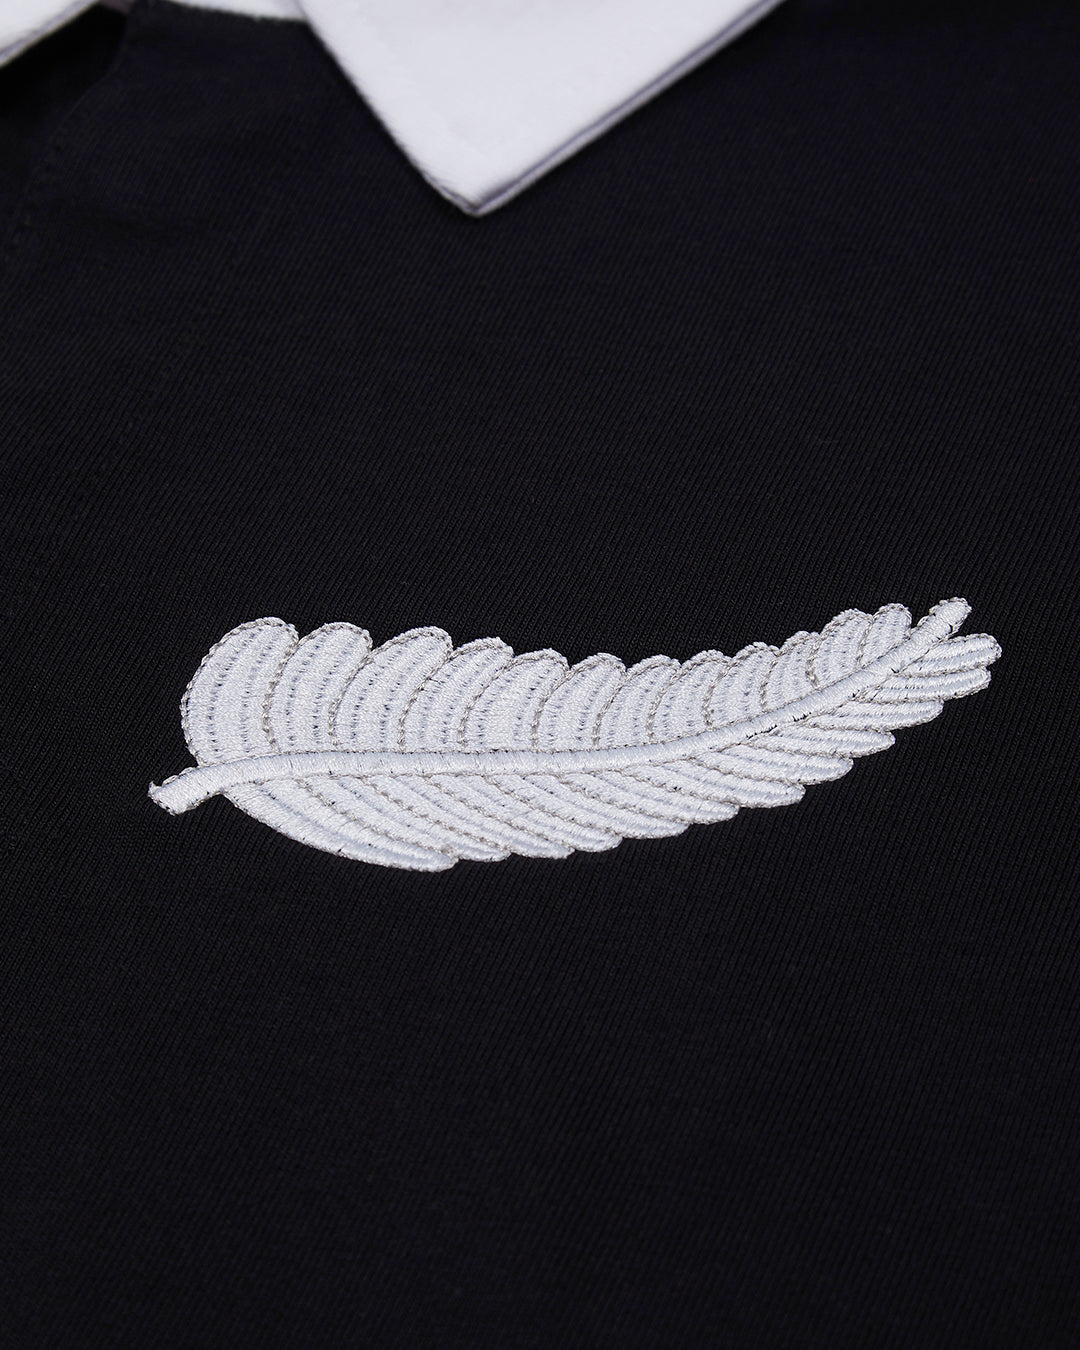 VC: NZL - Women's Vintage Rugby Shirt - New Zealand